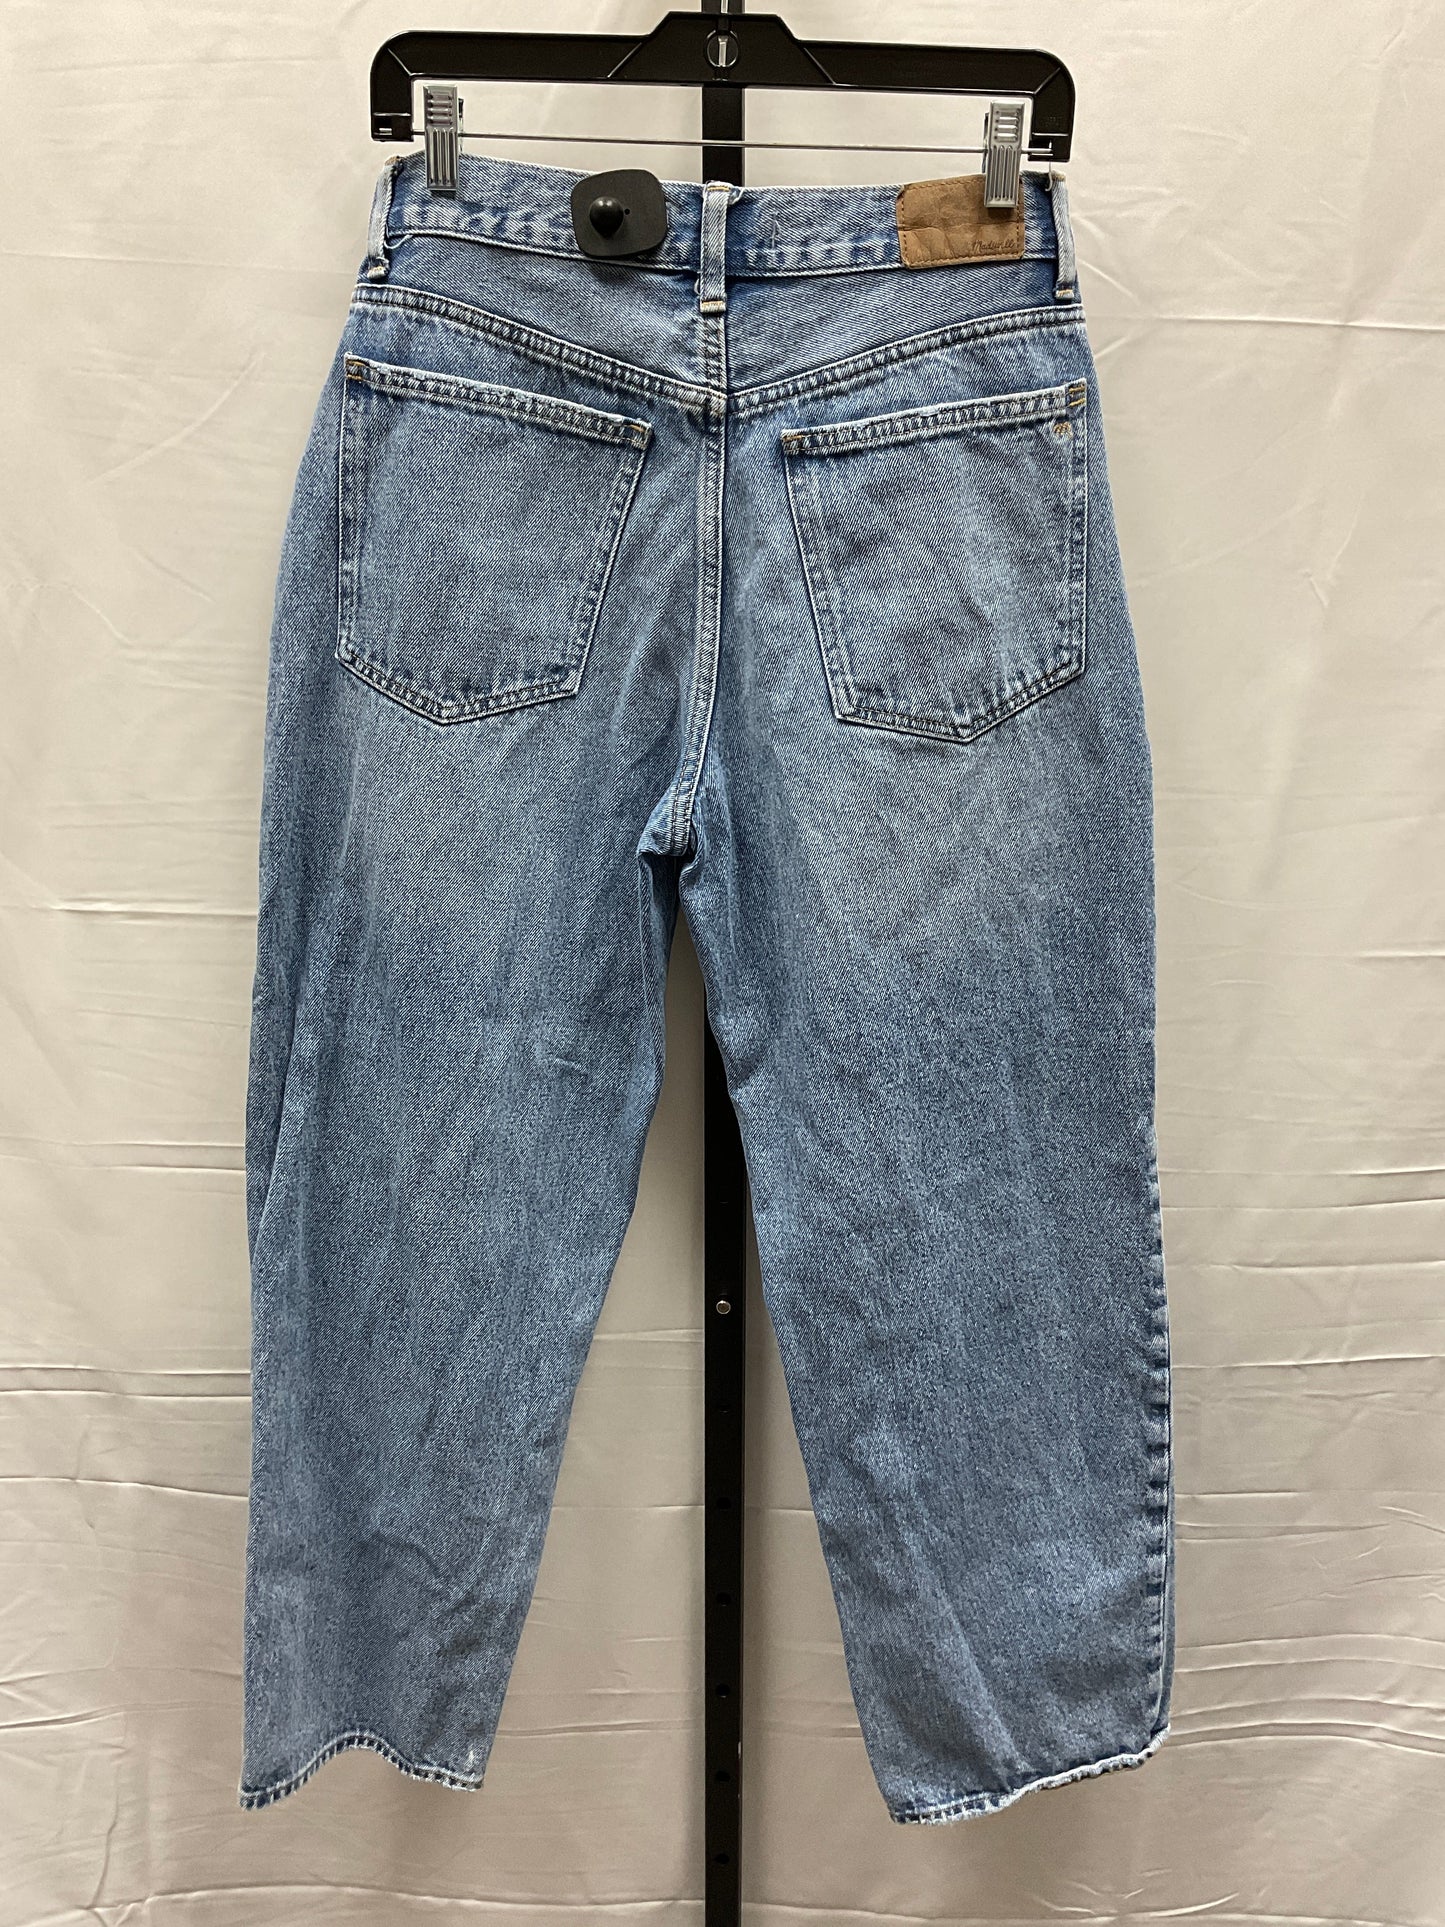 Jeans Straight By Madewell  Size: 8petite